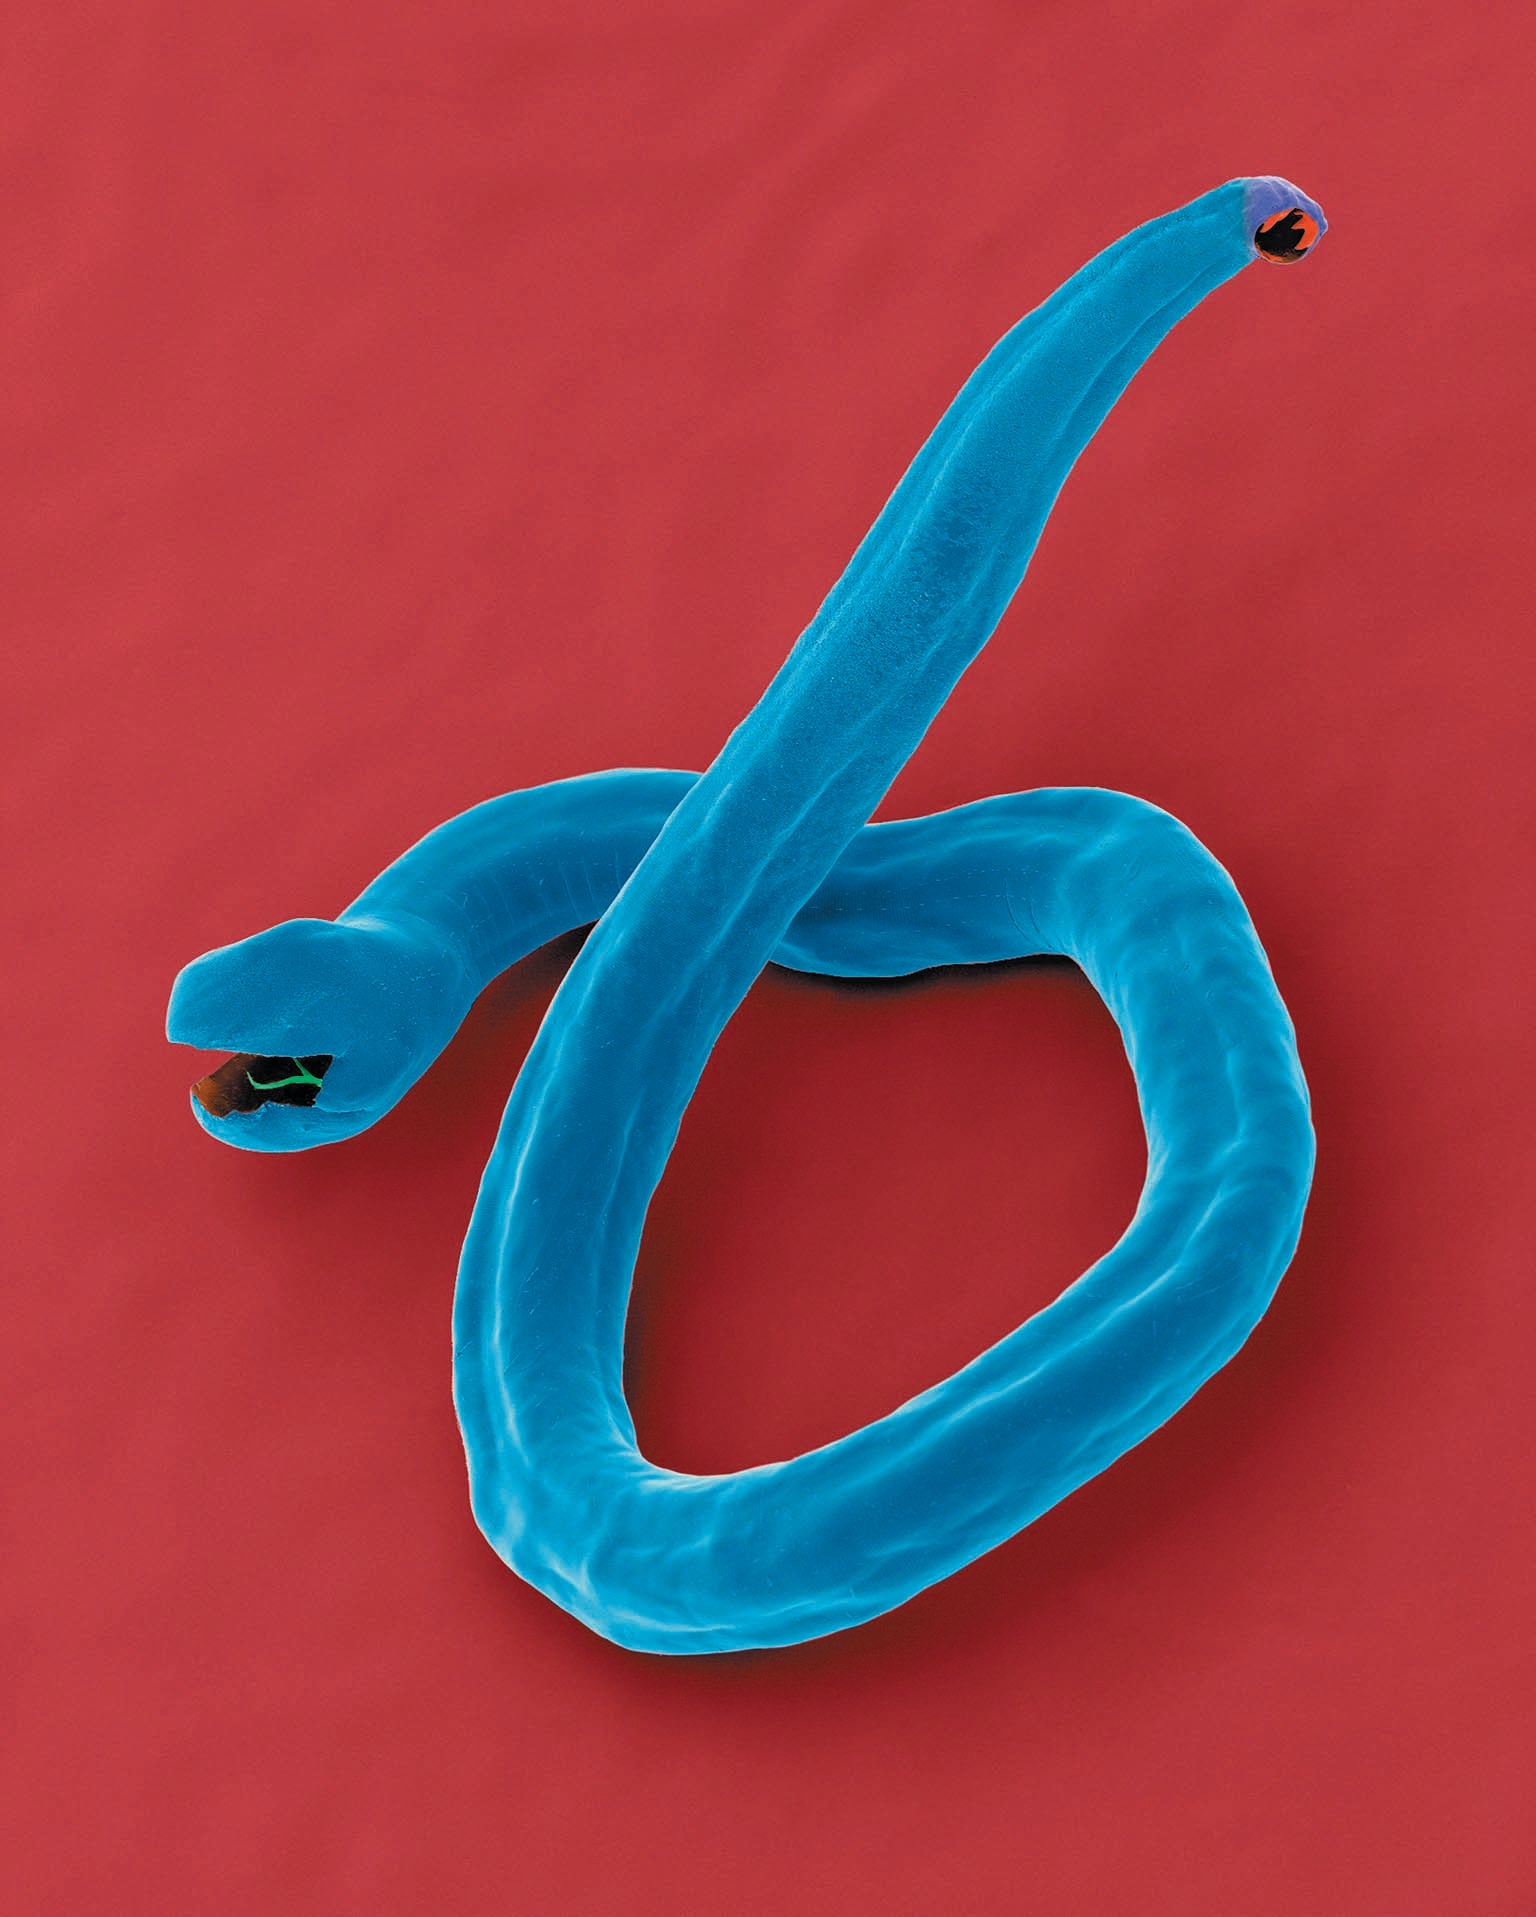 False color microscopic image, depicting blue tapeworm shown against a red background.